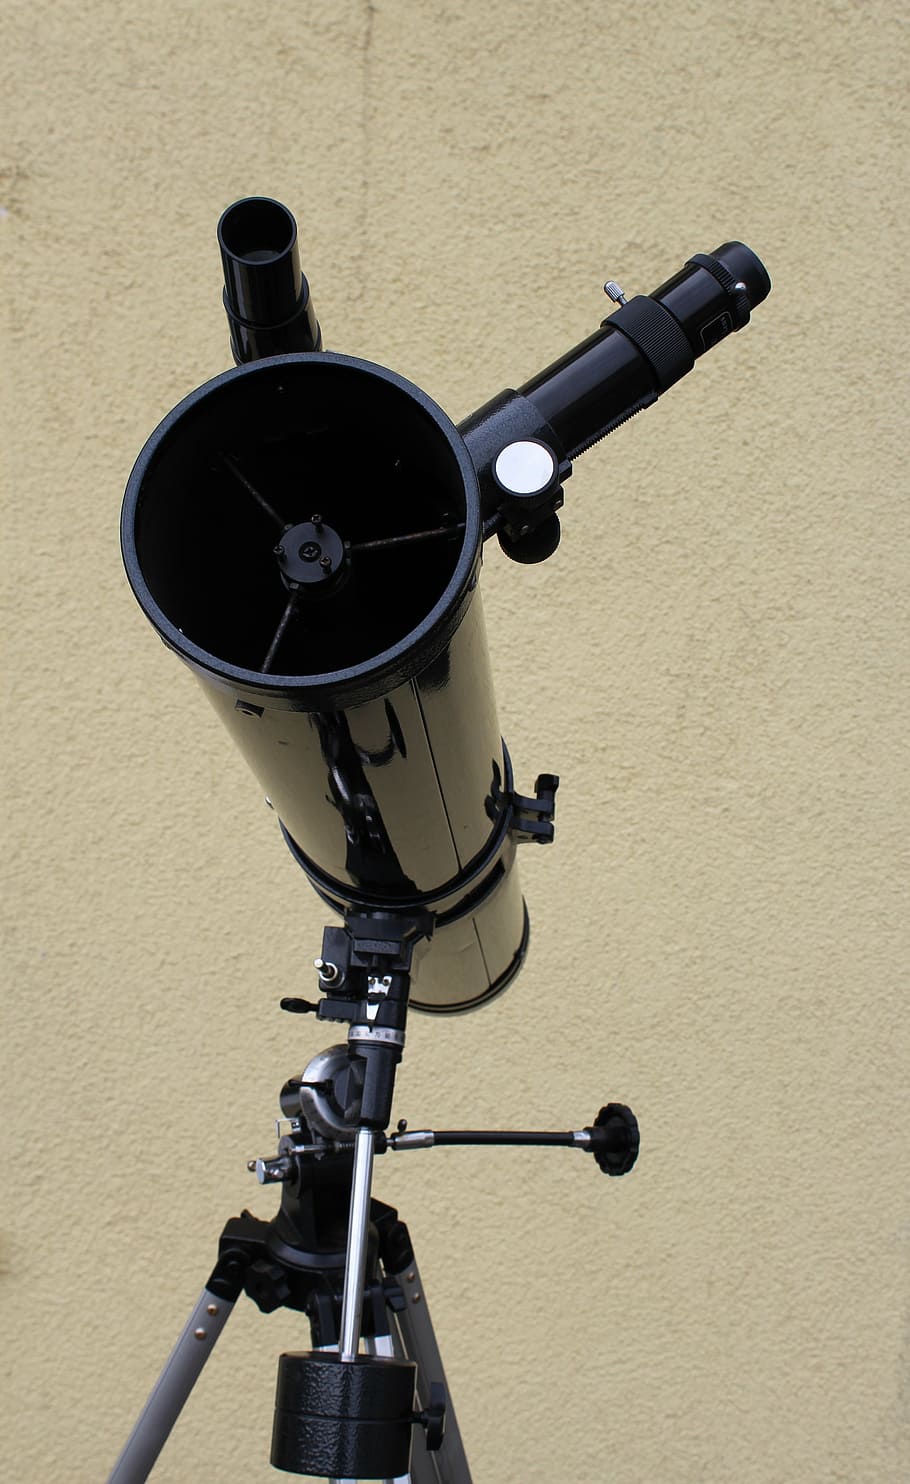 telescope, view, optics, binoculars, distant, watch, distant view, viewpoint, vision, sky